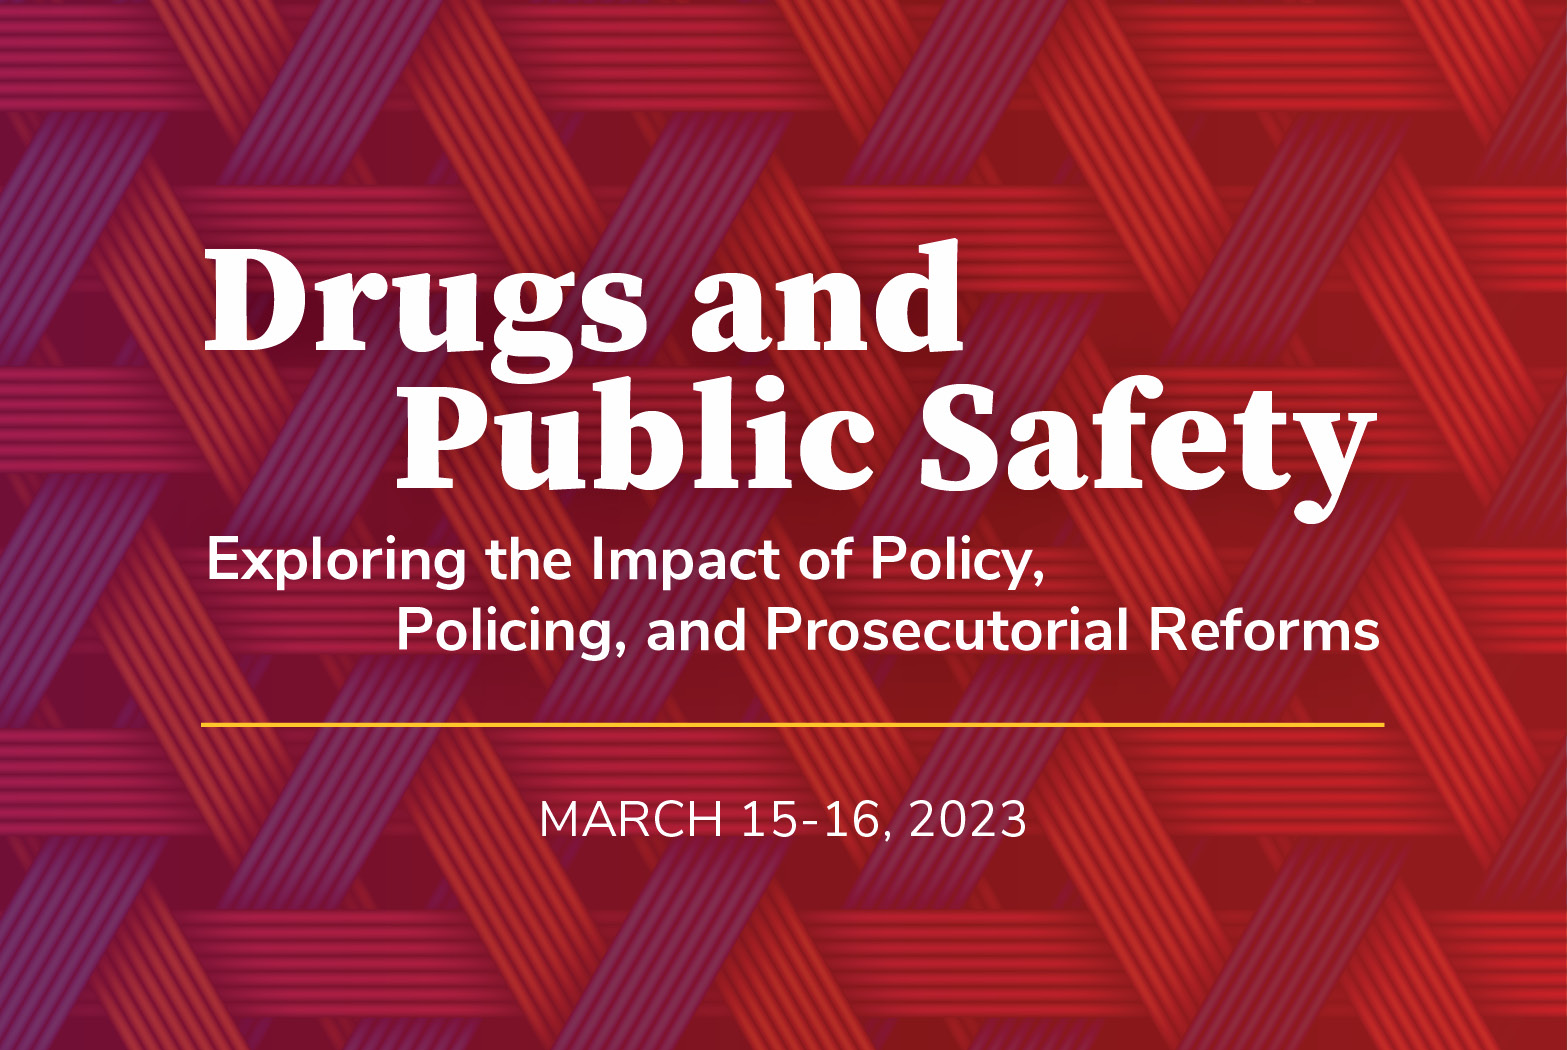 Drugs and Public Safety